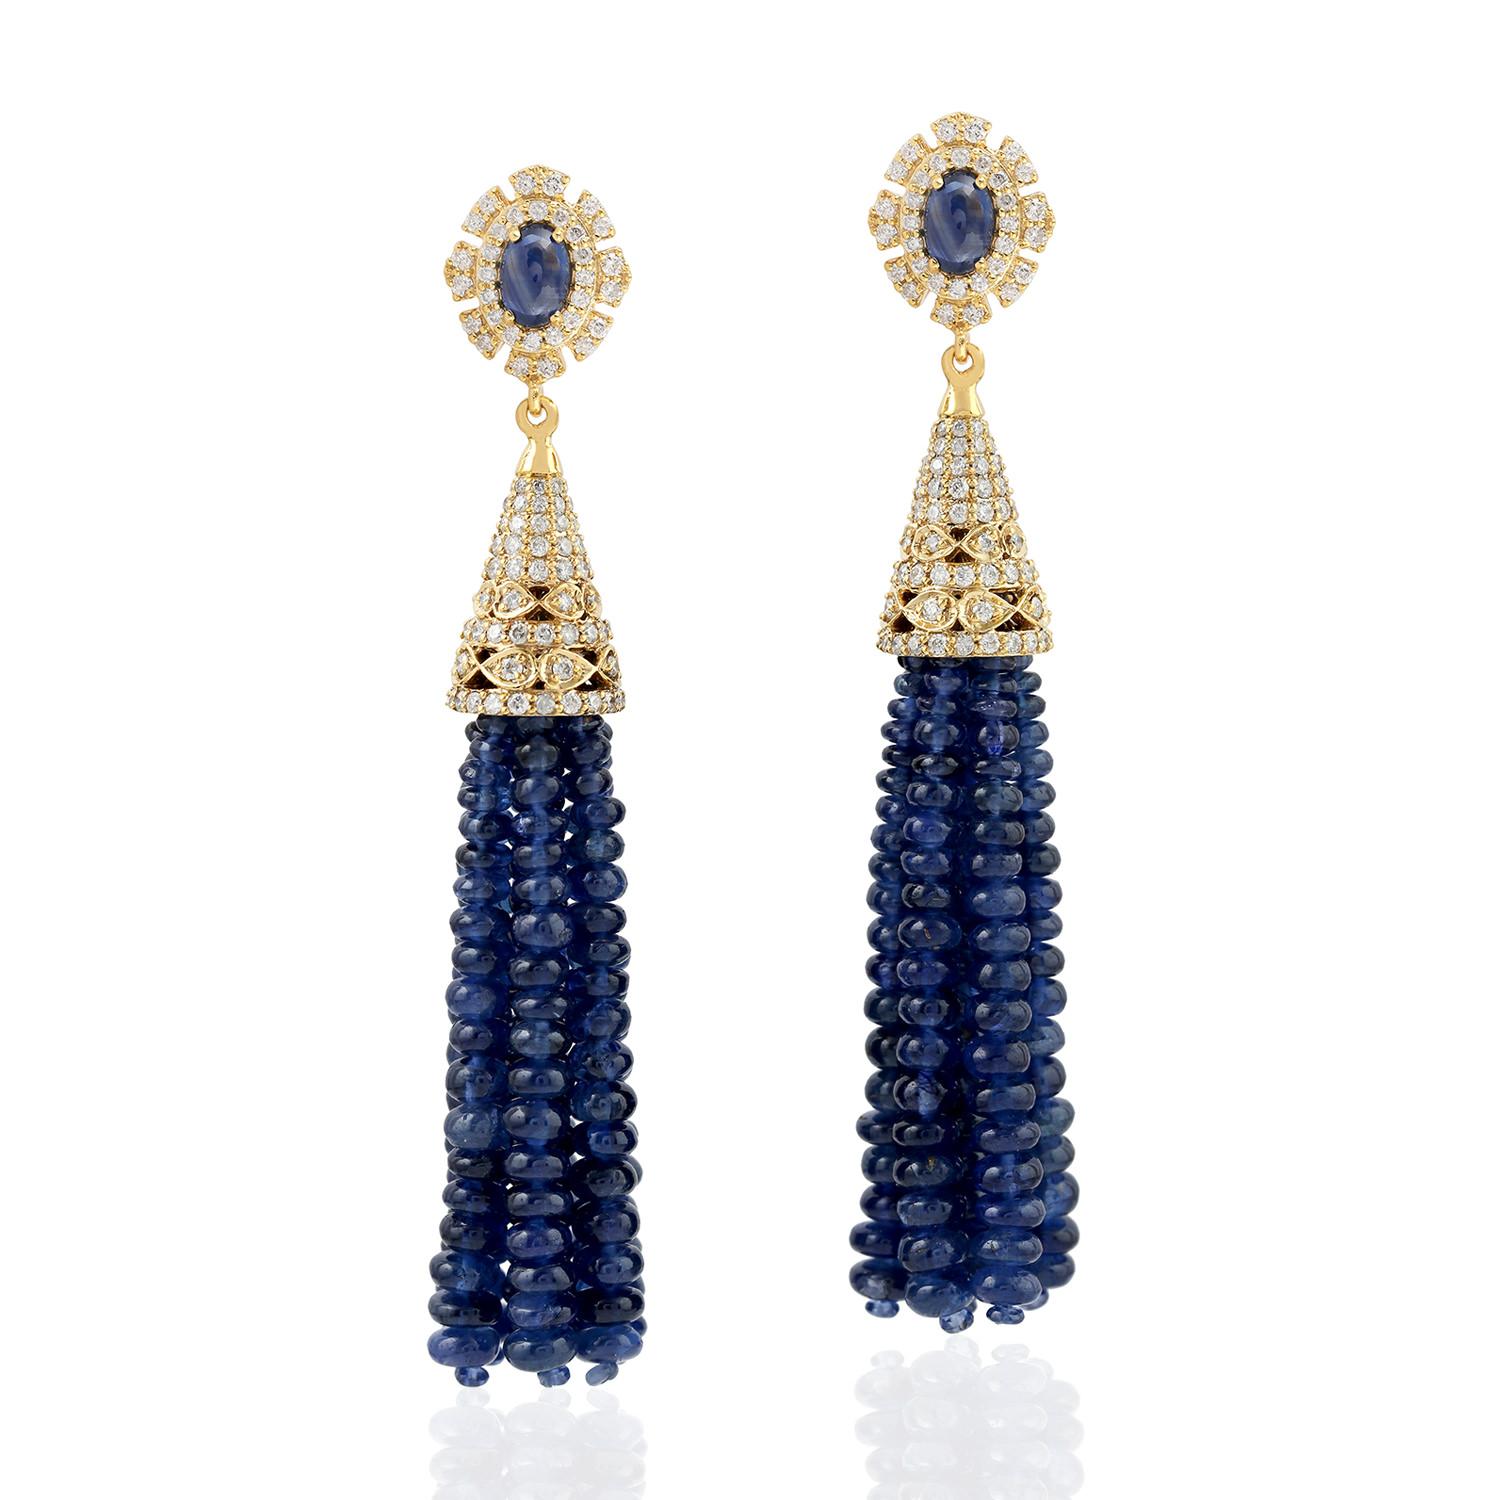 Contemporary 82.67ct Blue Sapphire Tassel Earrings With Diamonds Made In 18k Yellow Gold For Sale